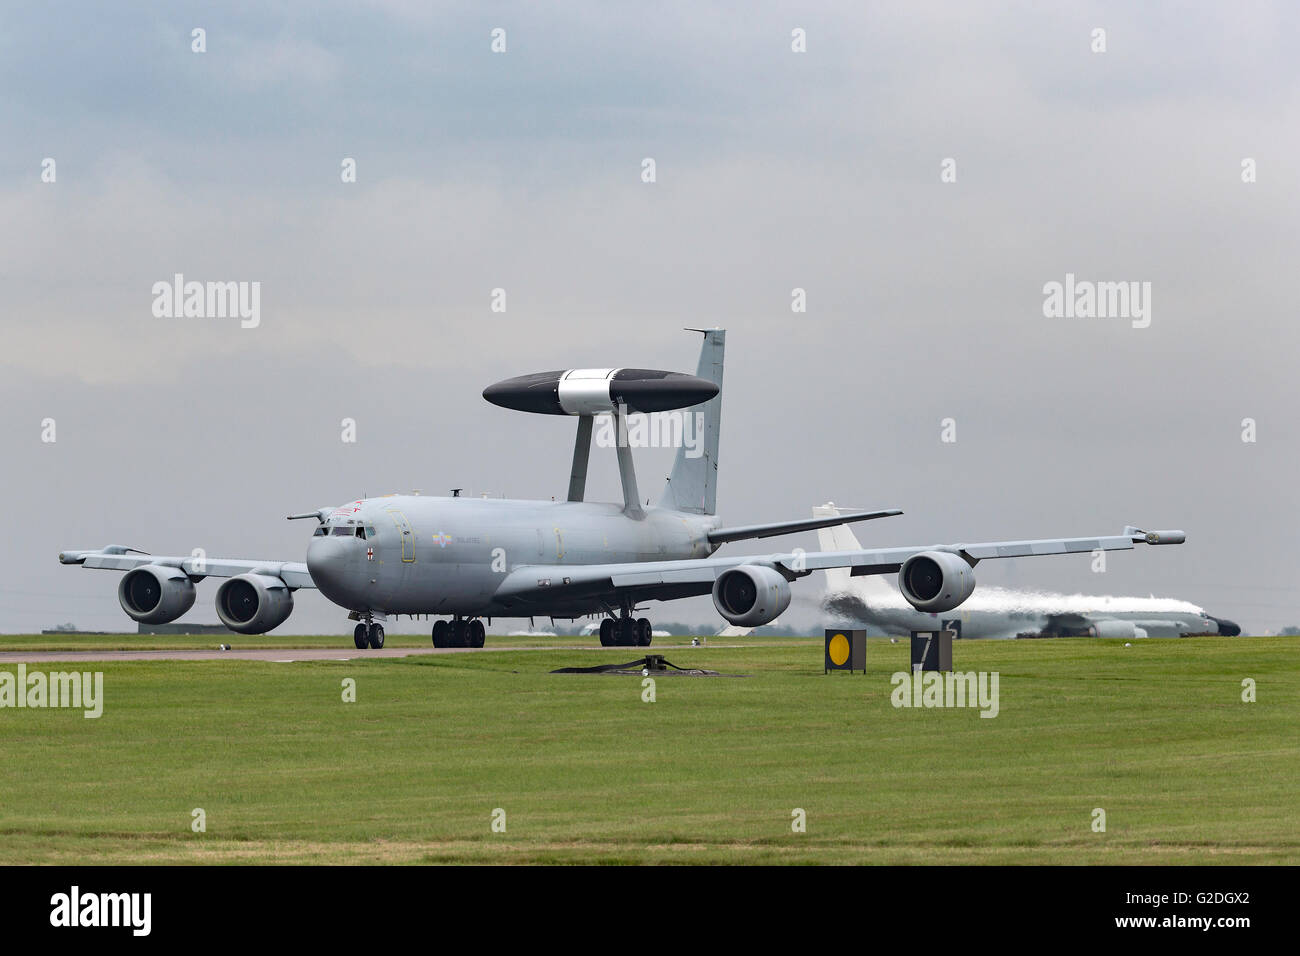 Royal Air Force Boeing E-3D Sentry AEW1 airborne early warning and control (AEW&C) aircraft from 8 Squadron at RAF Waddington Stock Photo